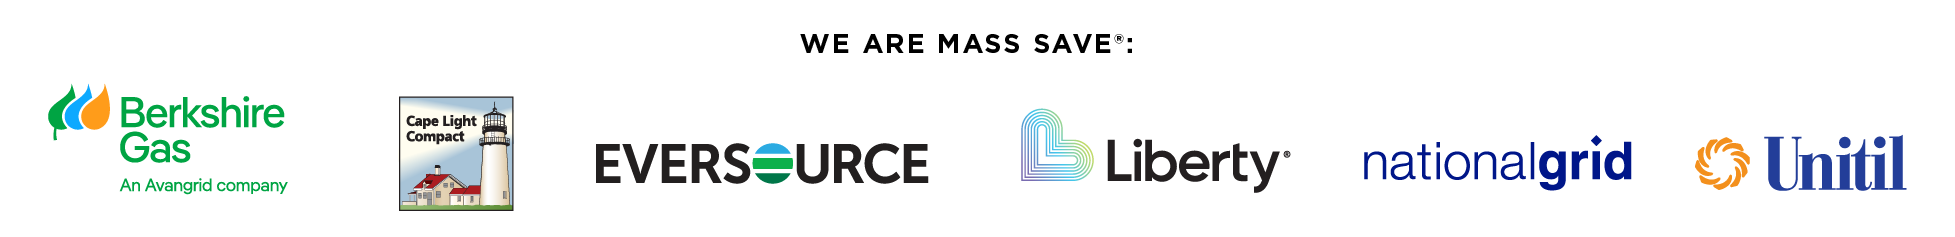 We are Mass Save